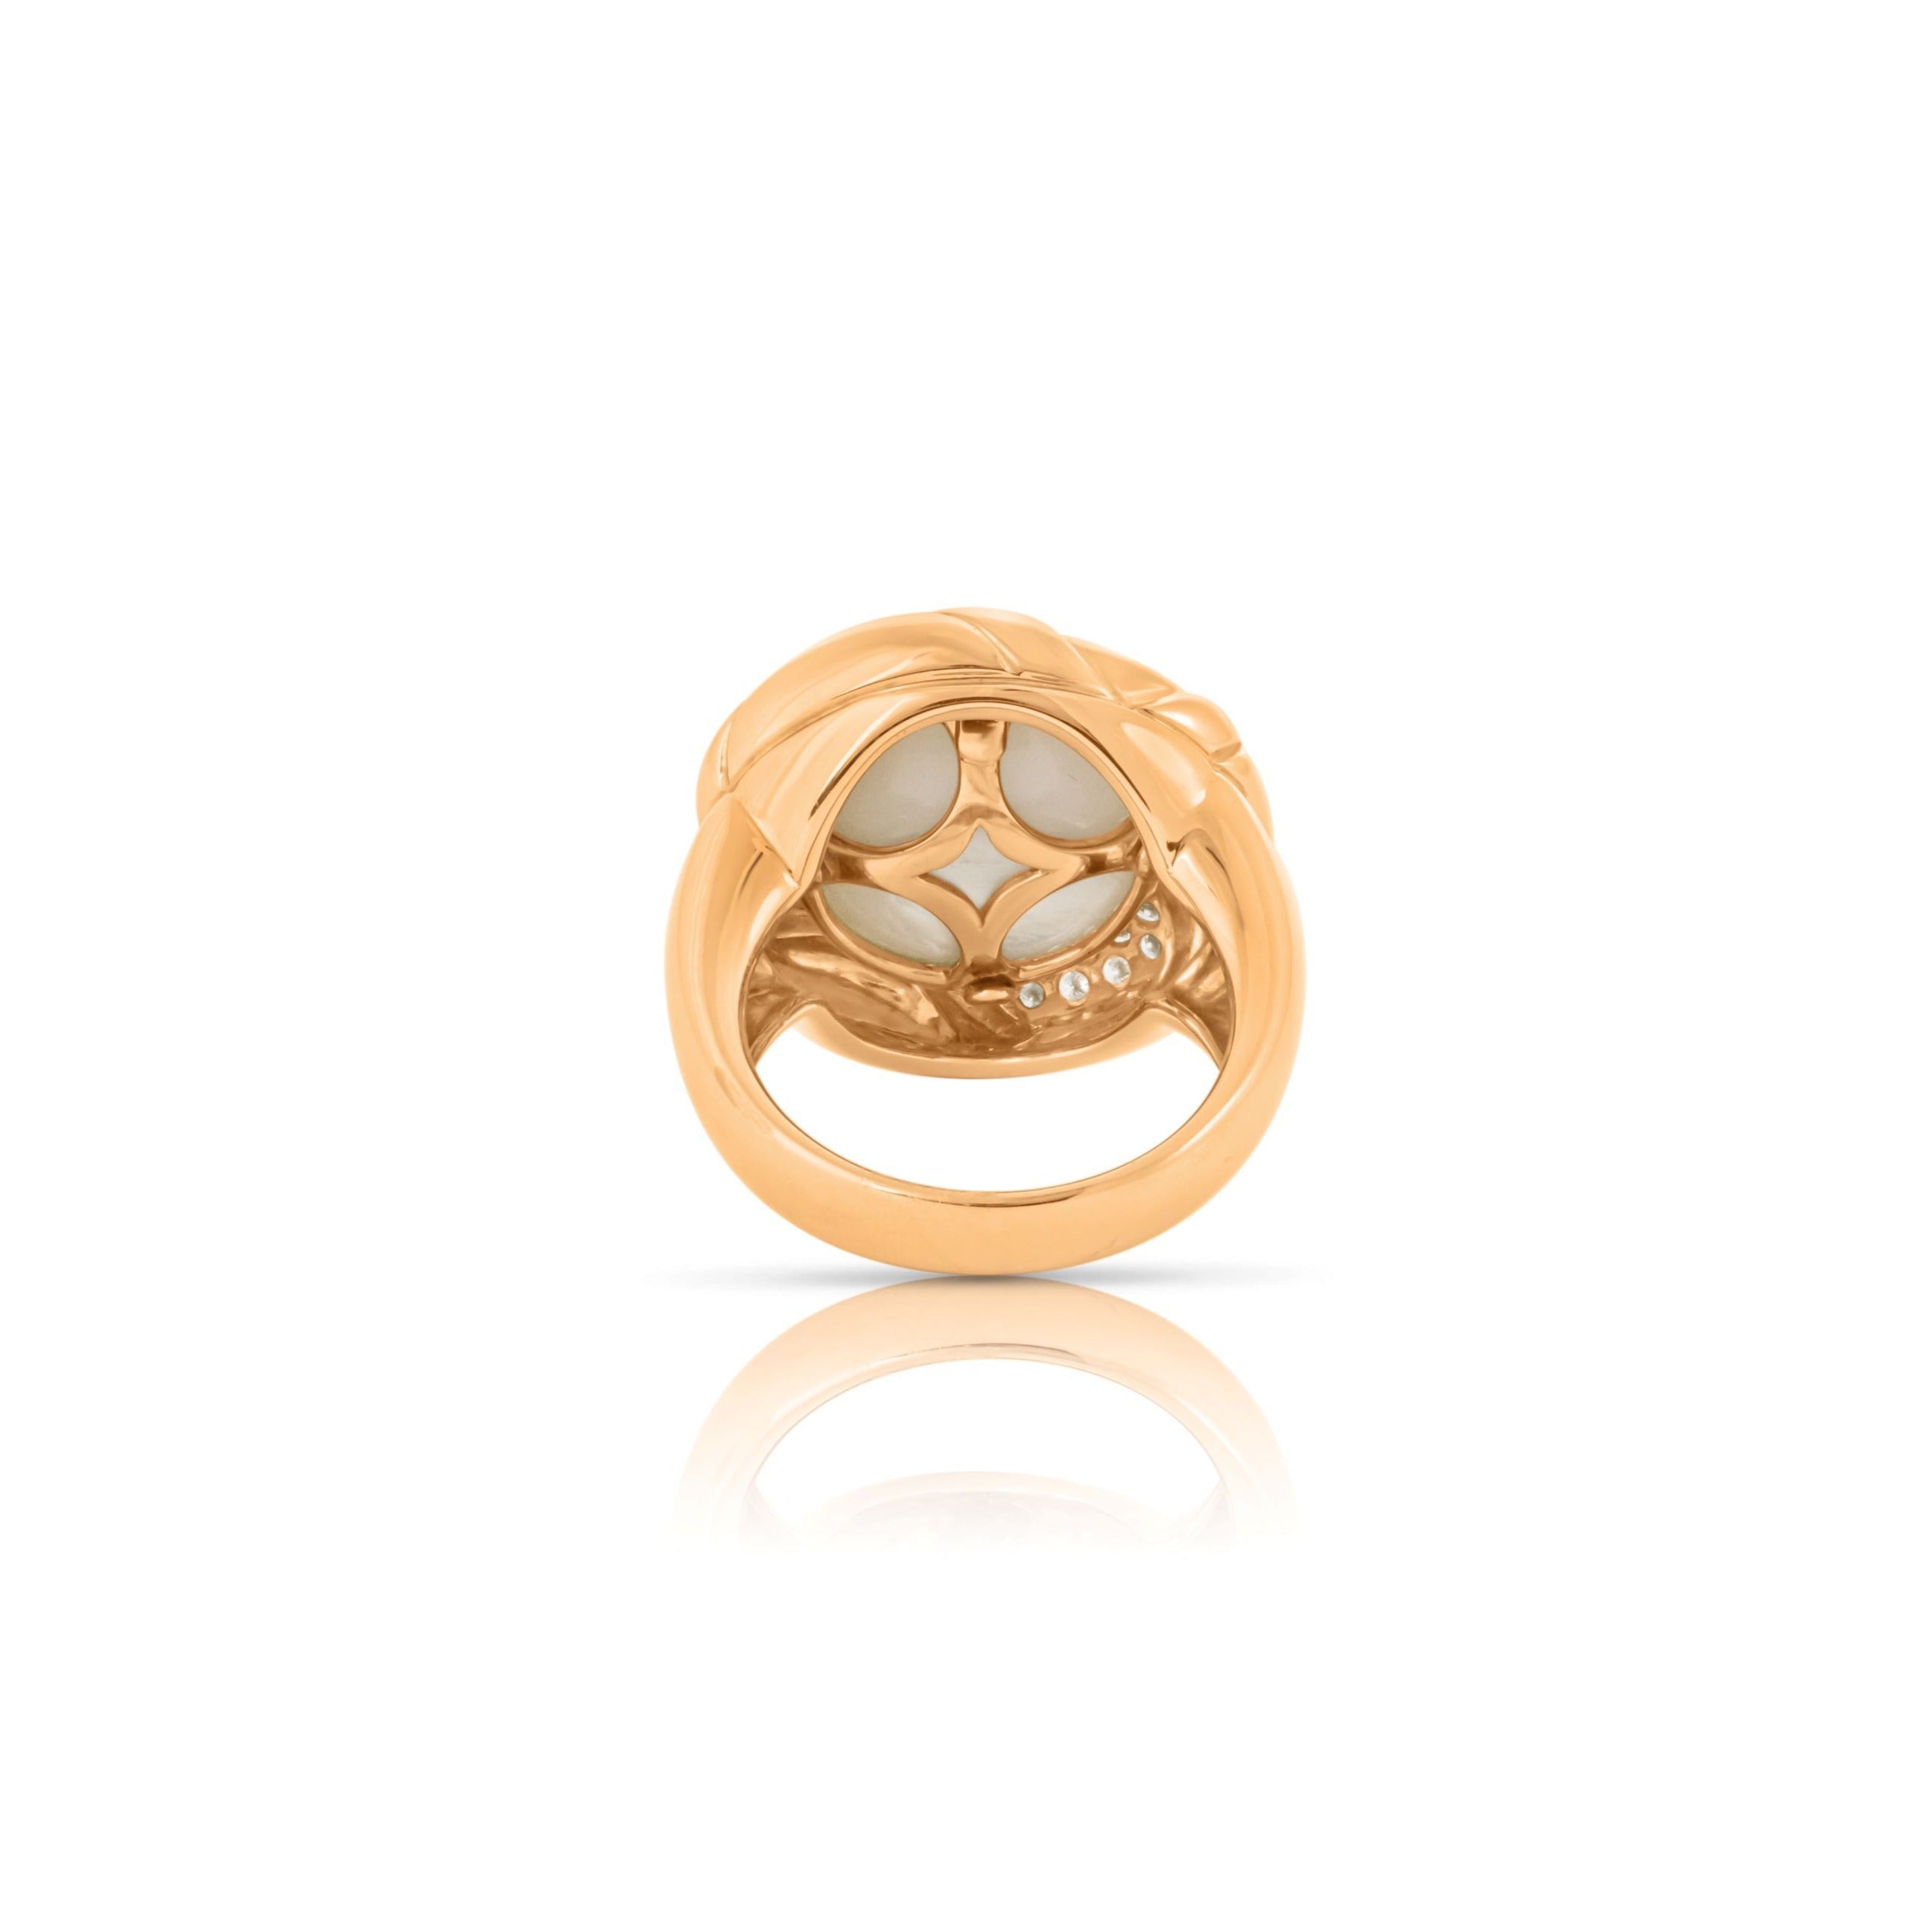 Back view of 1980s-1990s 18ct gold ring.